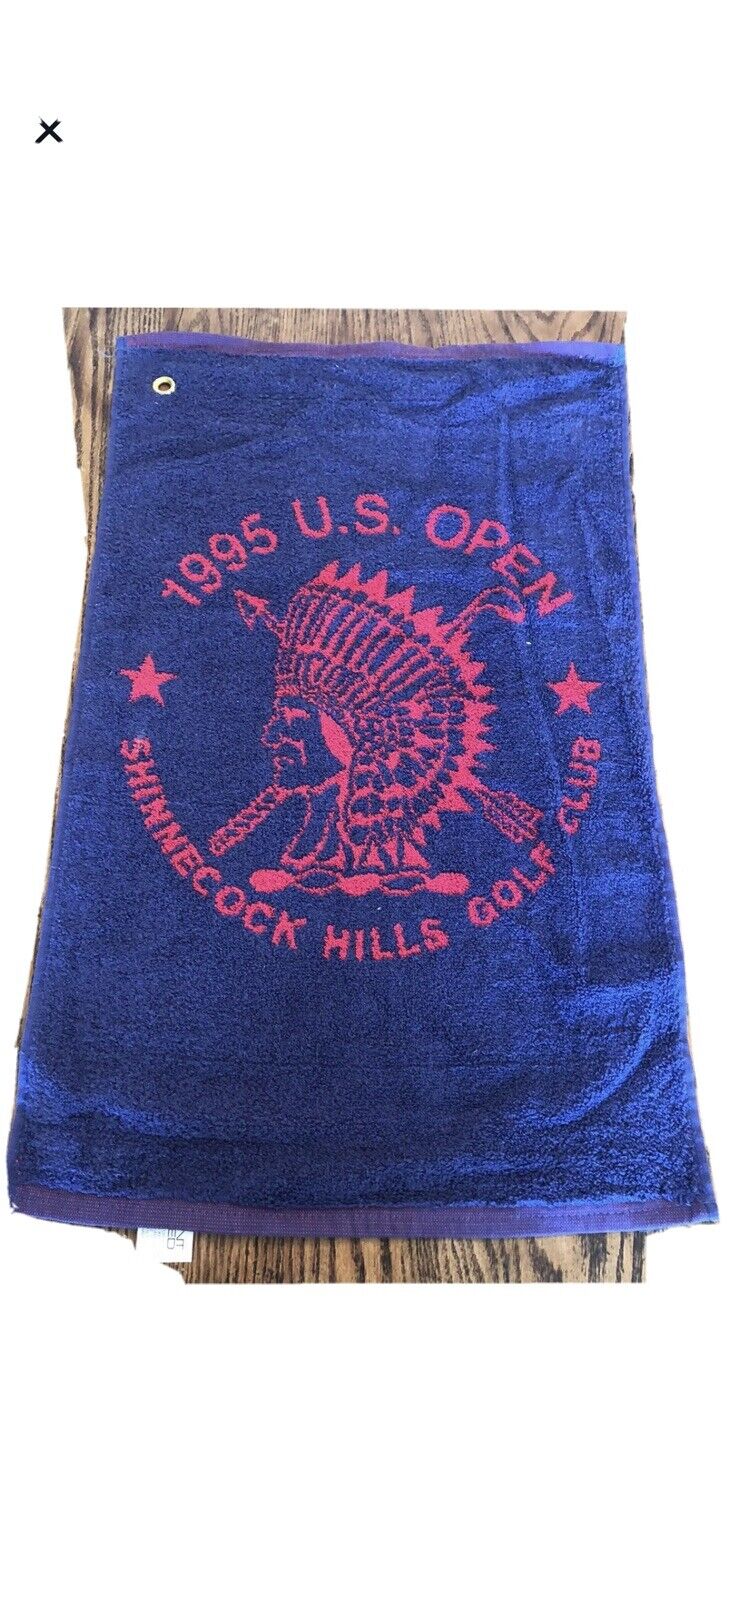 Vintage Golf Towel SEAL limited product - Shinnecock 1995 US Hills Spasm price Open